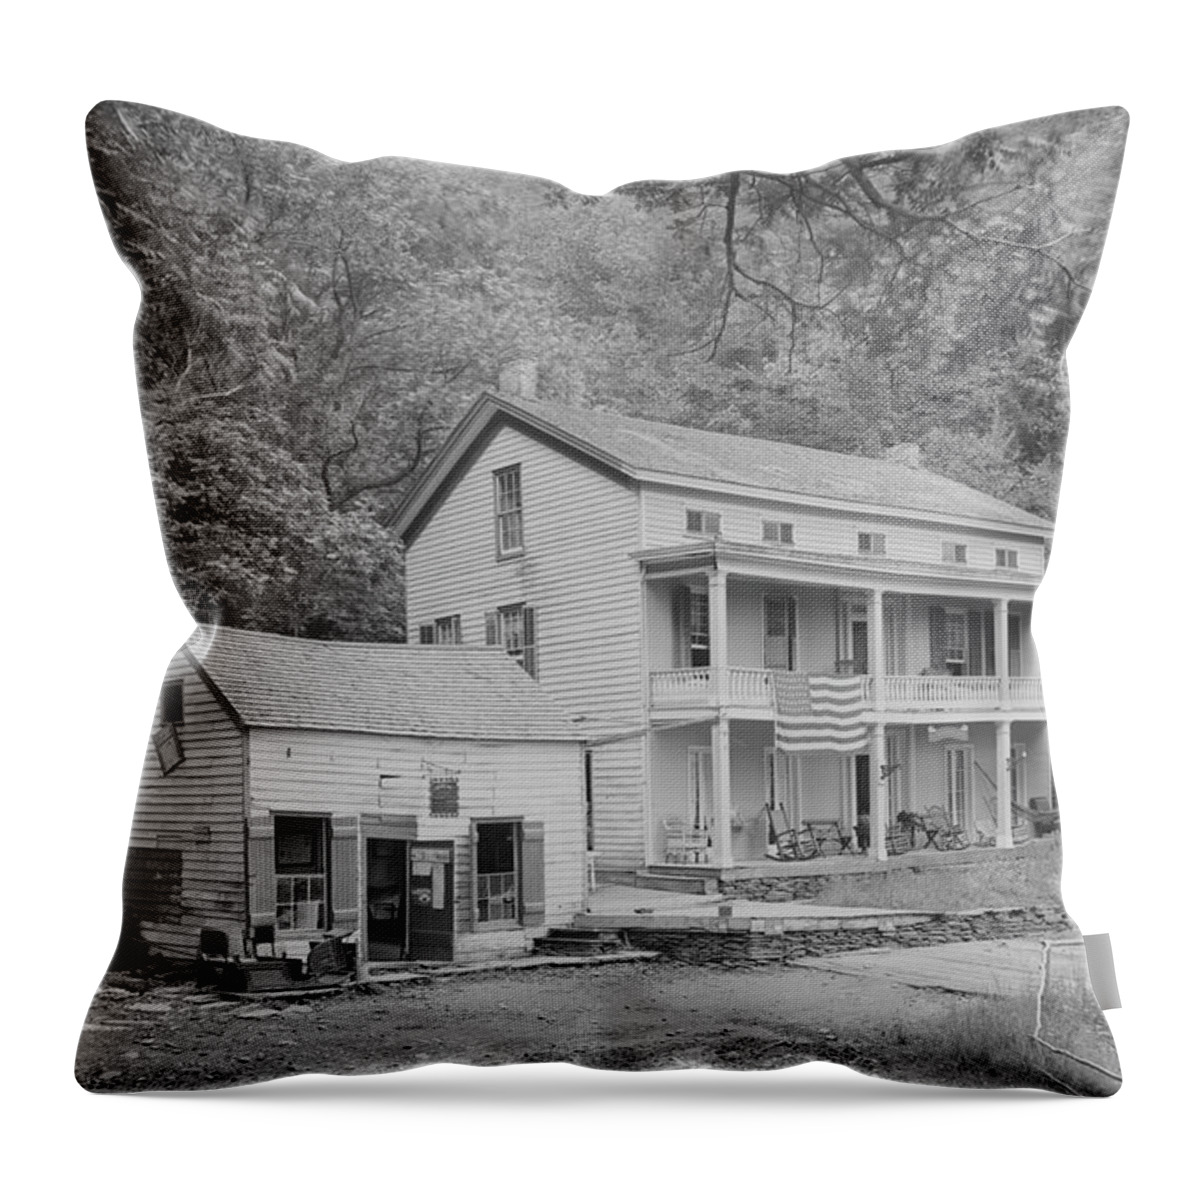 Sleepy Throw Pillow featuring the painting Rip Van Winkle House, Sleepy Hollow, Catskill Mountains, N.Y. by 